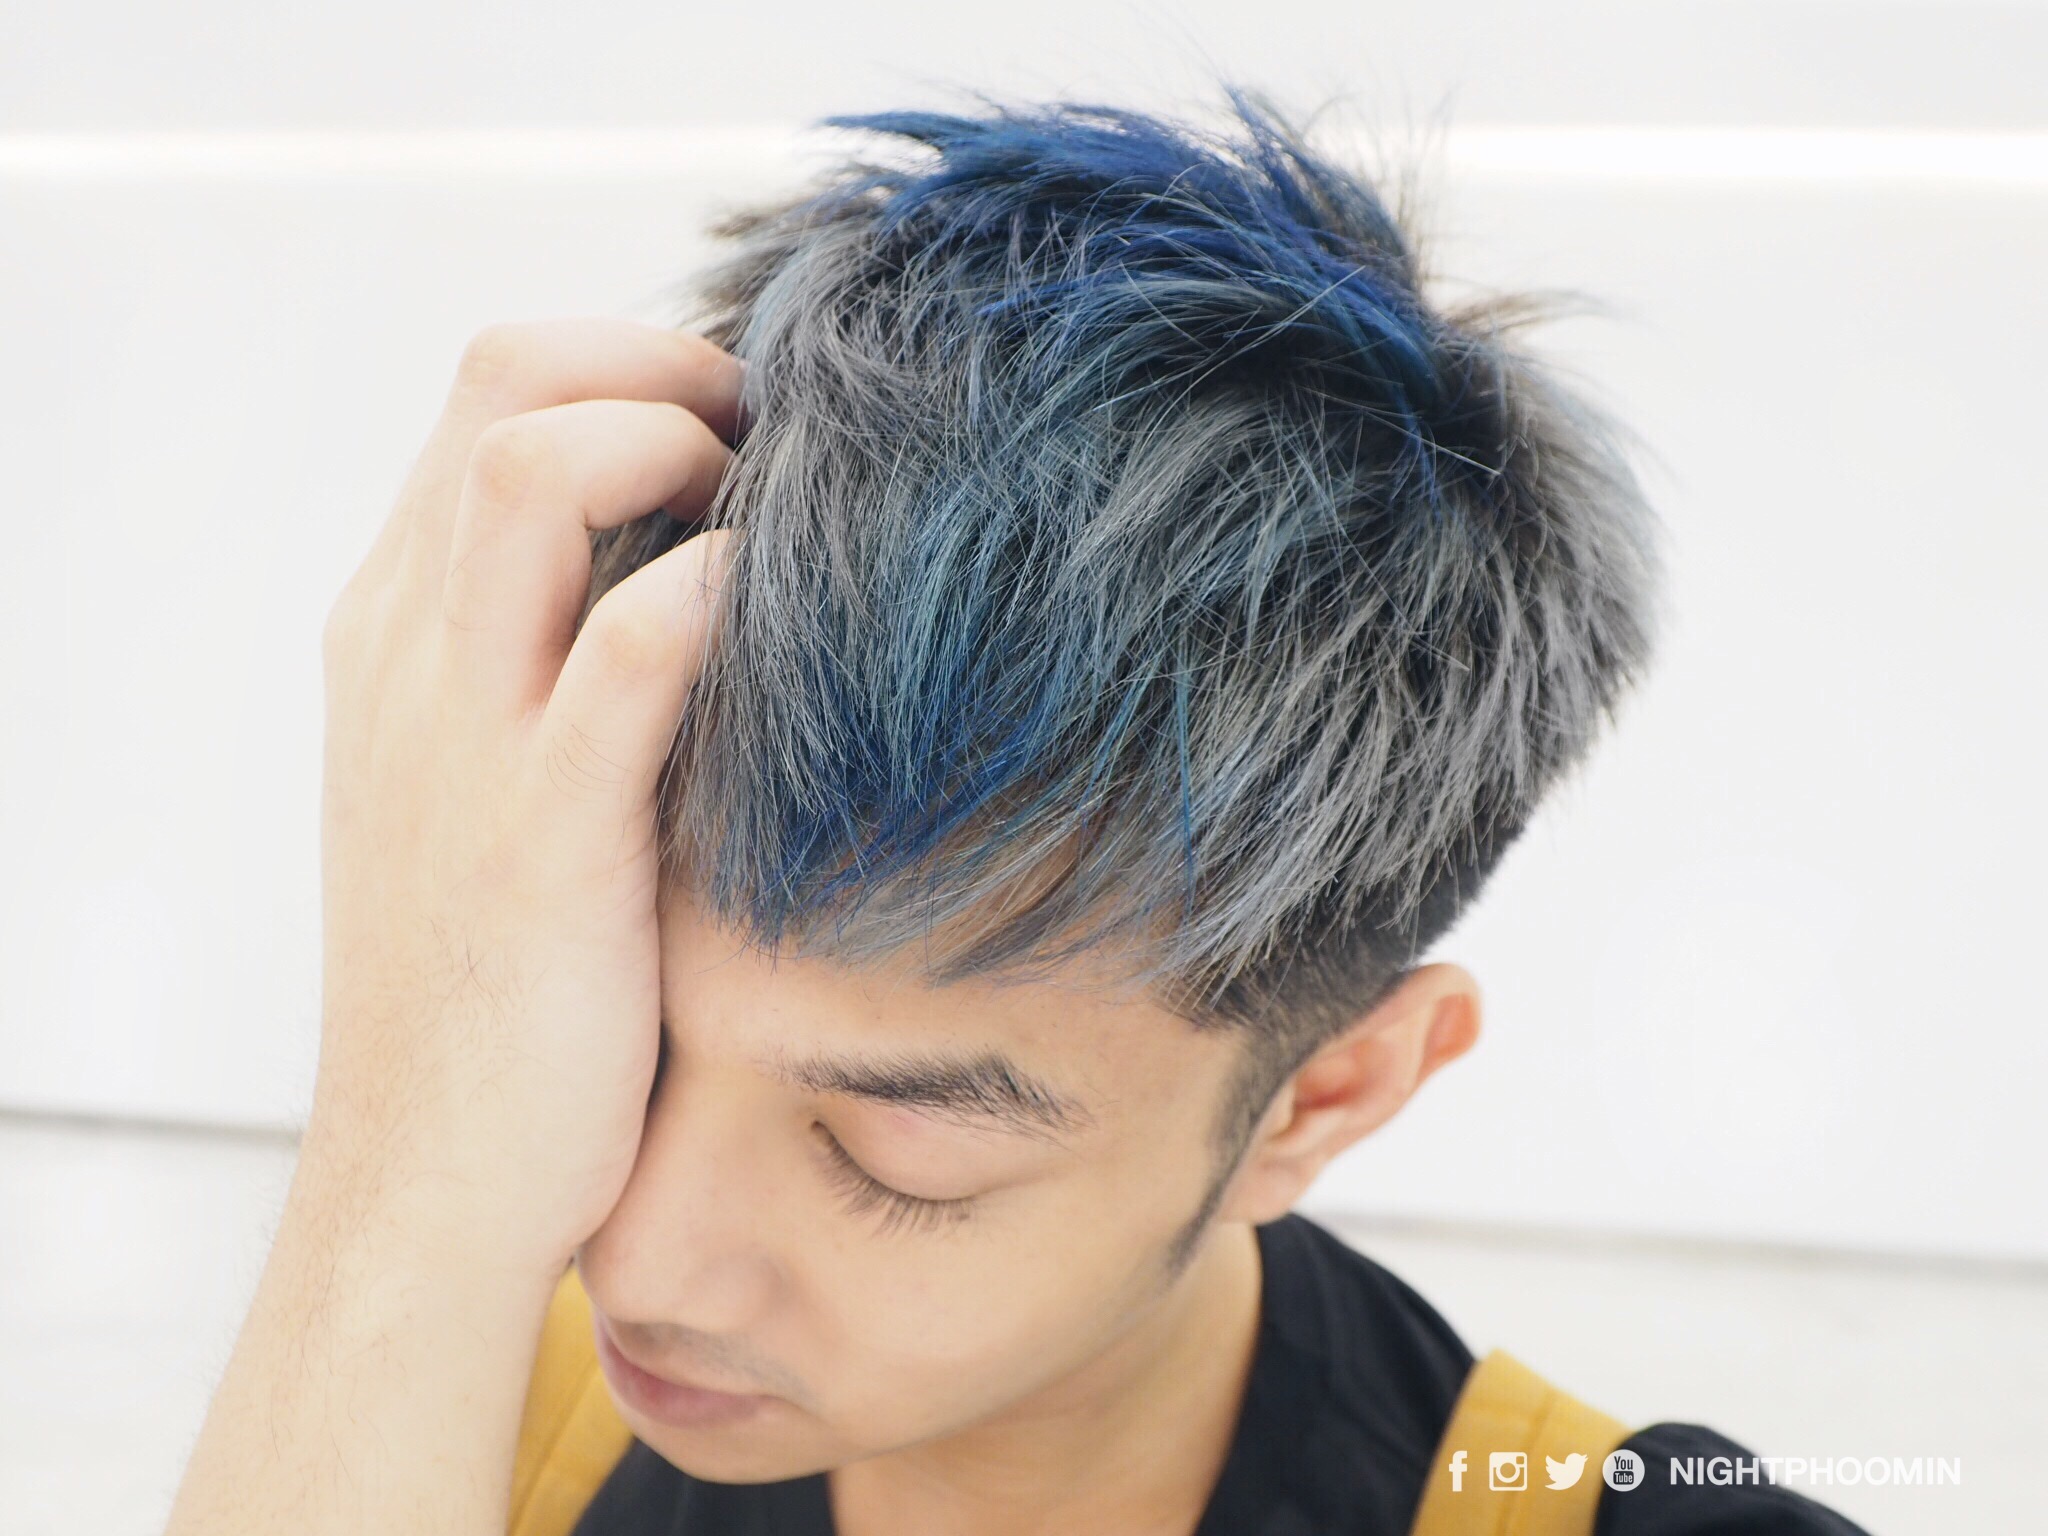 8. Silver Blue Hair Men's: How to Style and Maintain the Color - wide 6